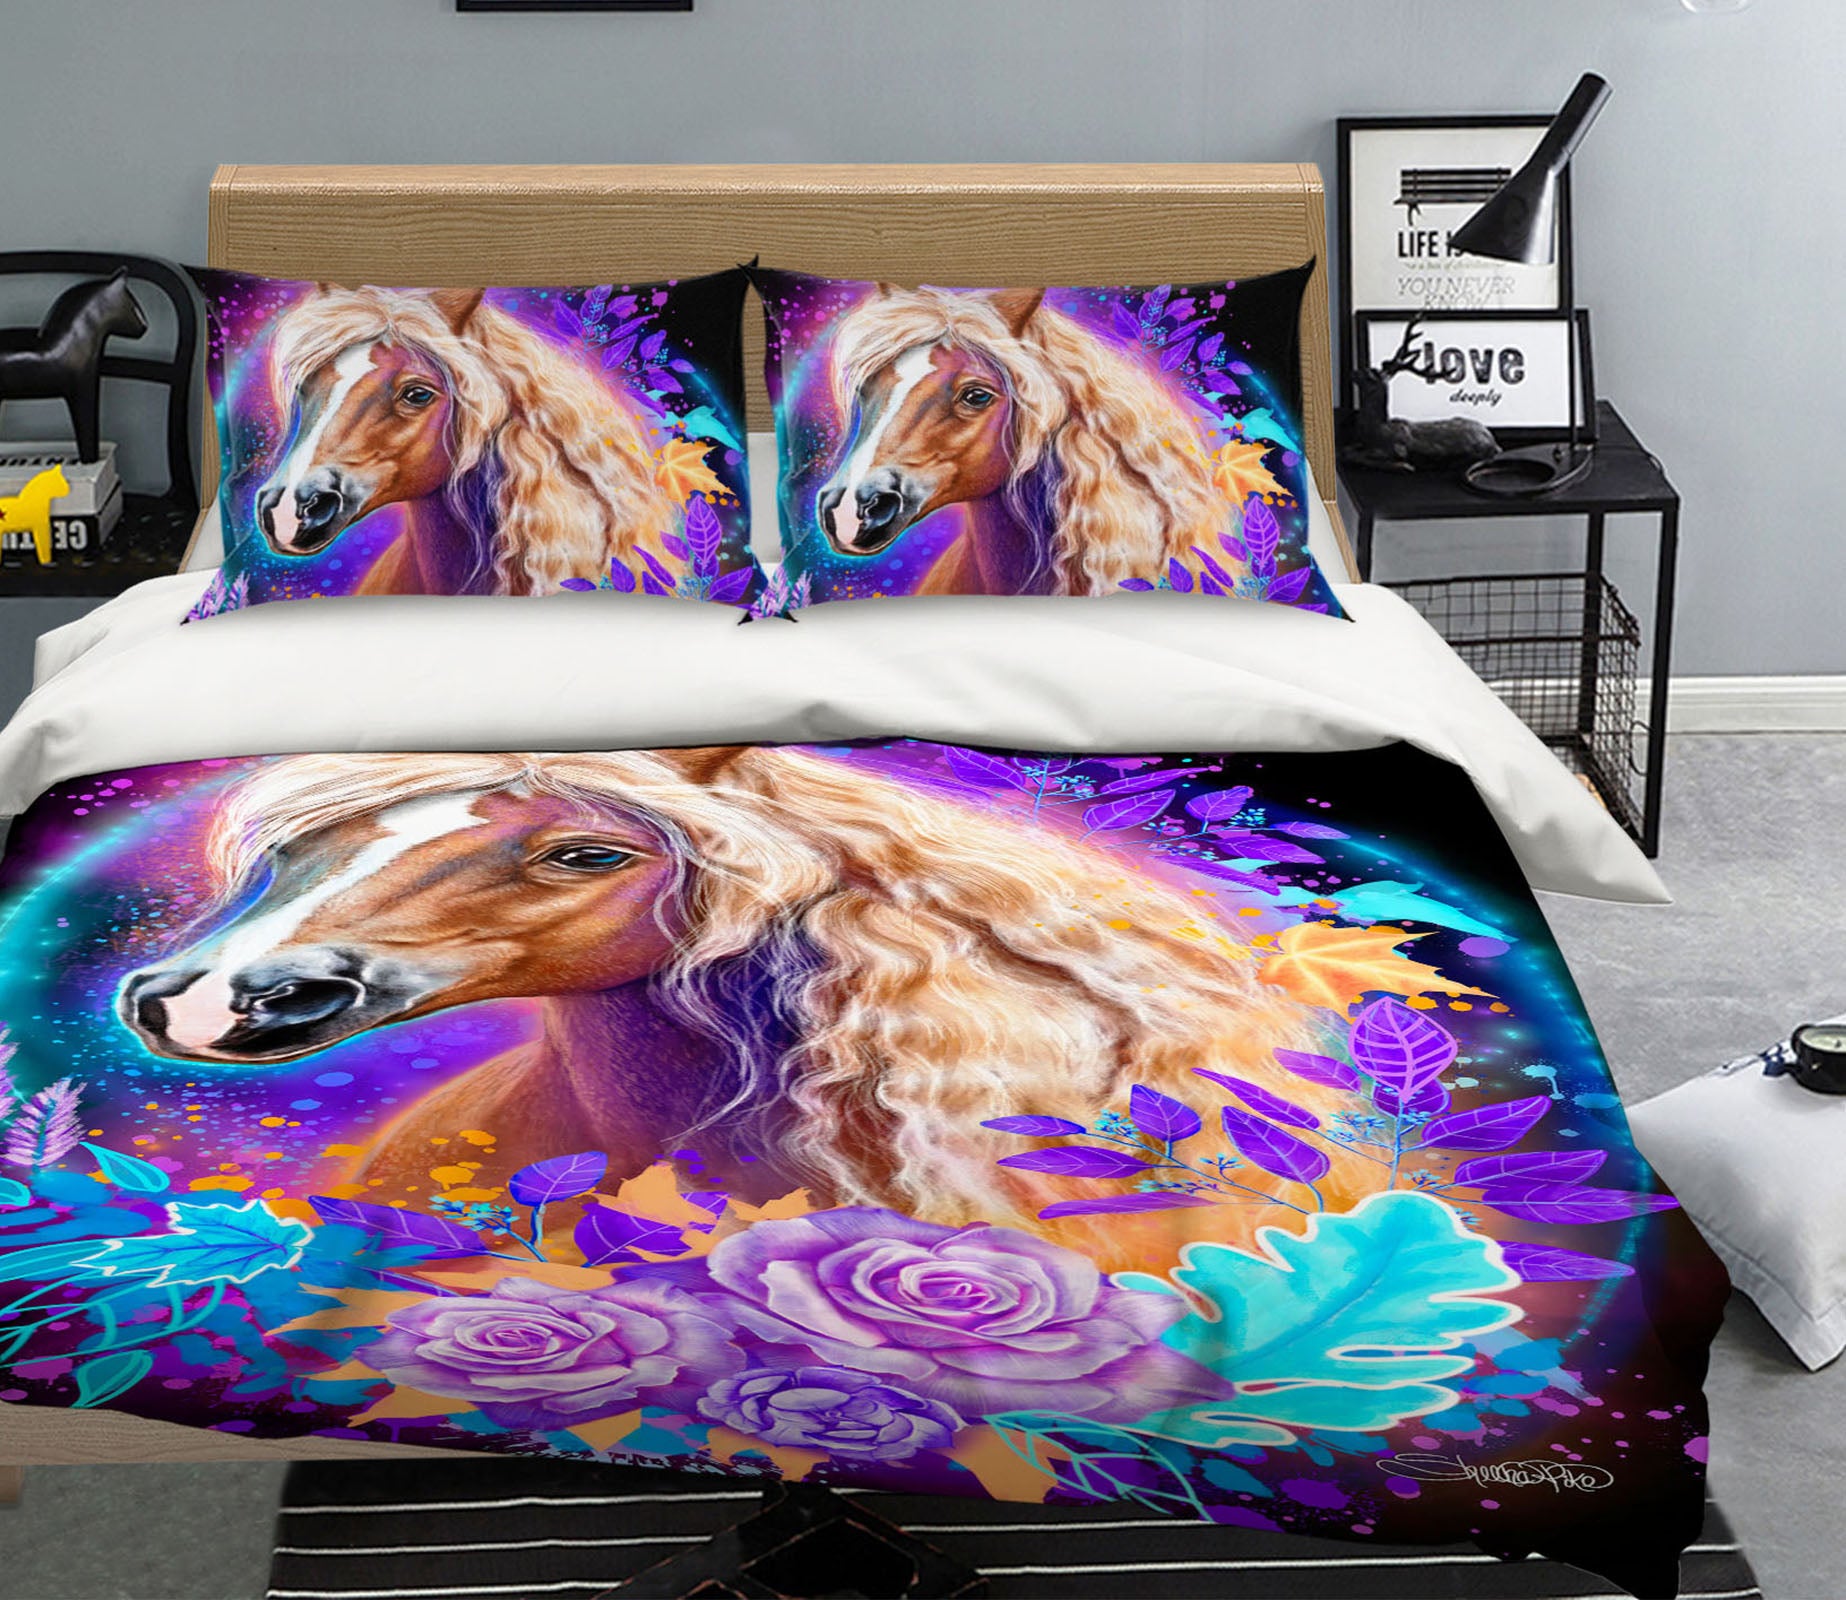 3D Purple Rose Horse 8554 Sheena Pike Bedding Bed Pillowcases Quilt Cover Duvet Cover